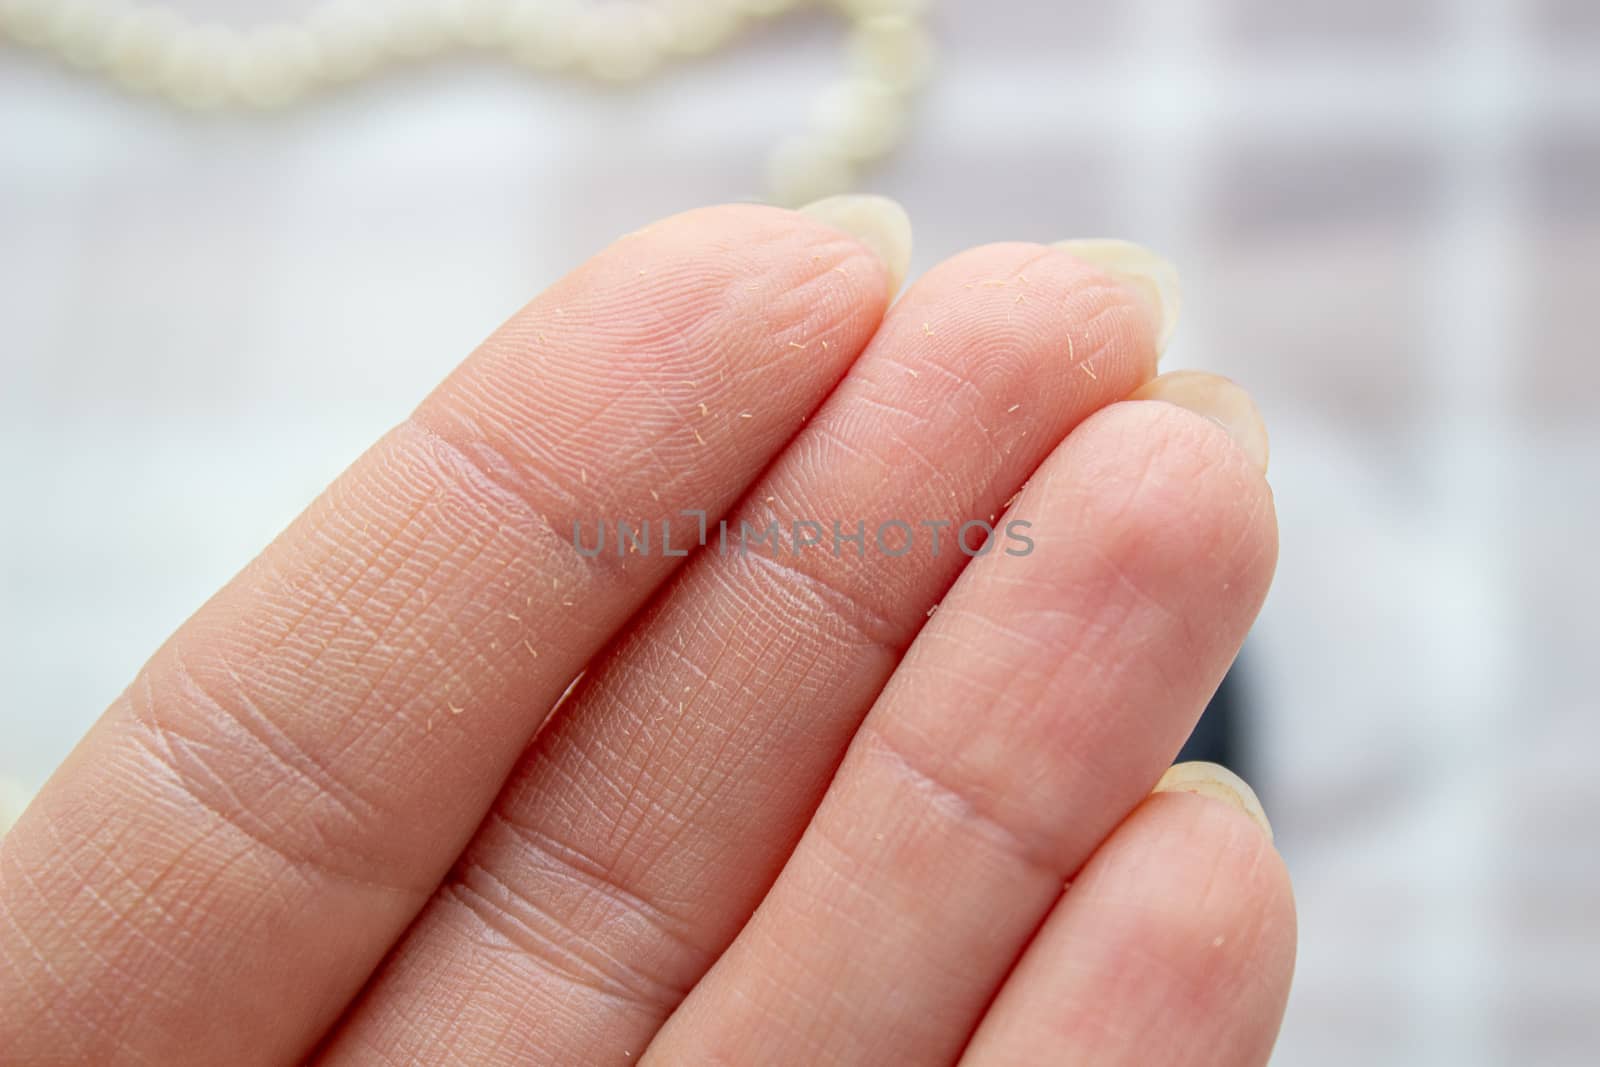 Cosmetic product on the fingers of a woman's hand, close-up